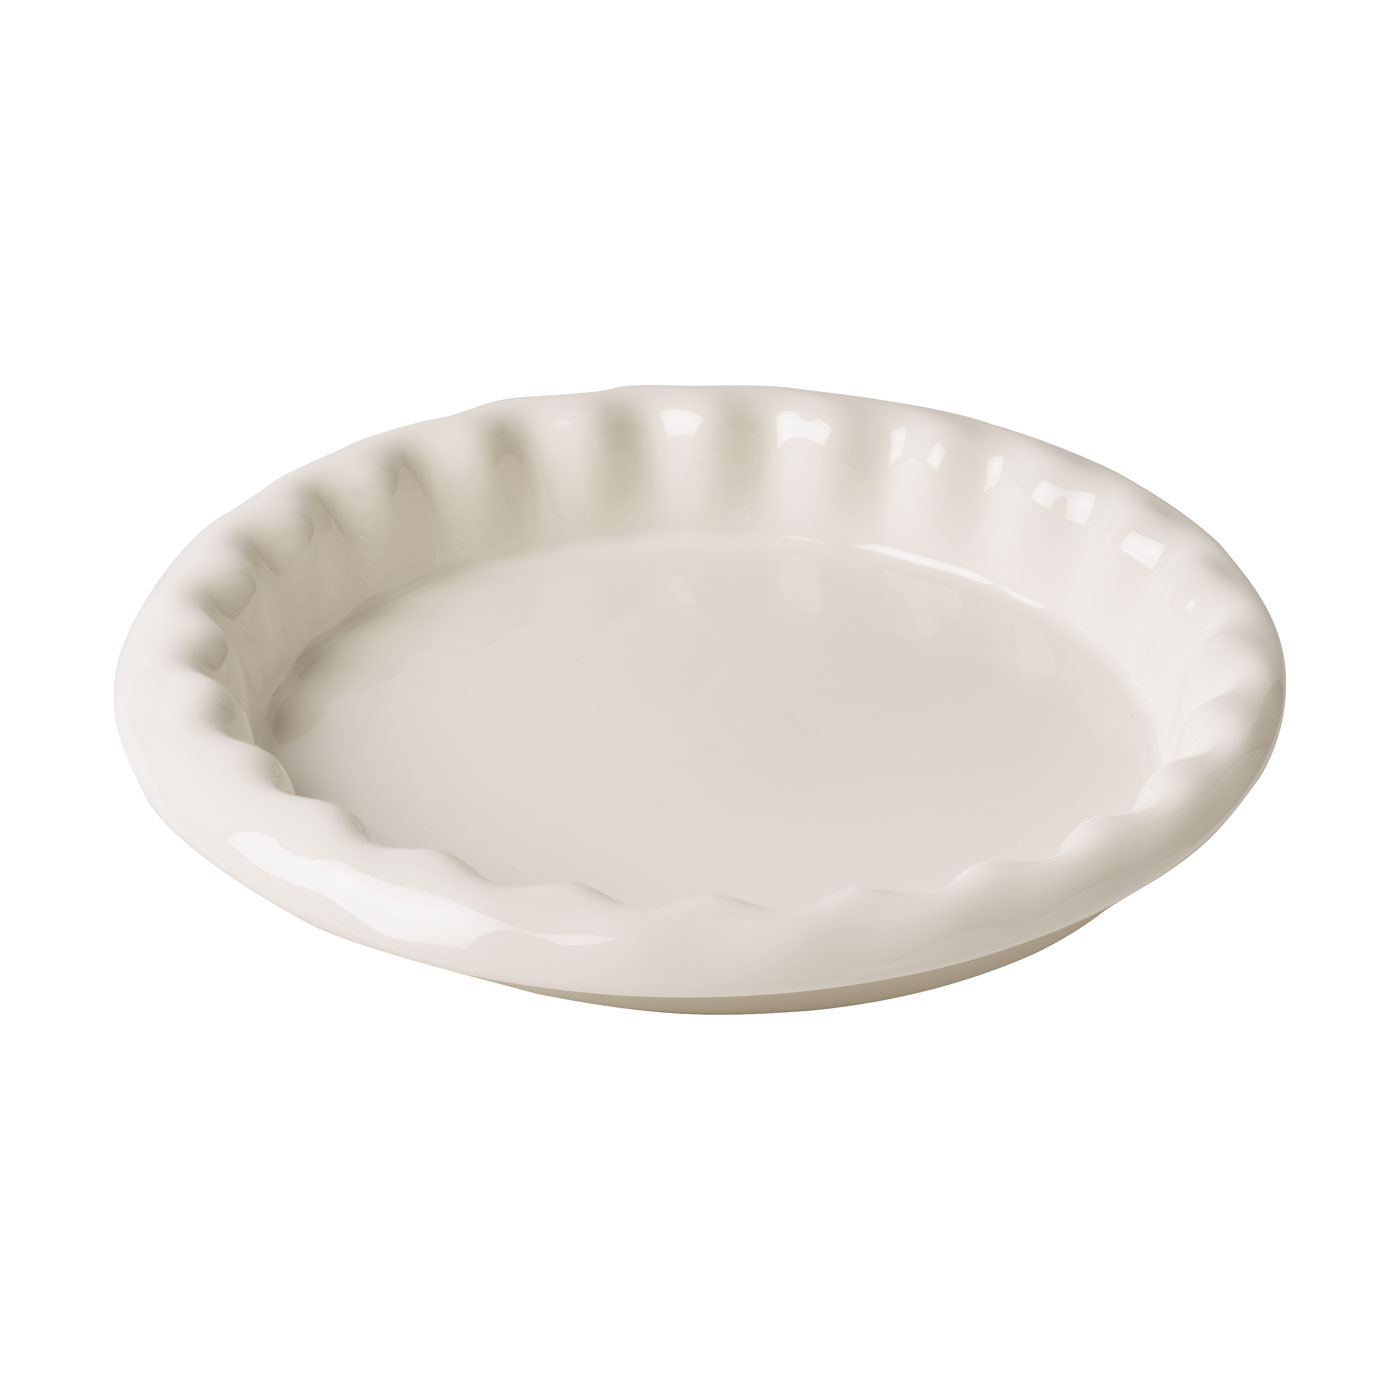 Villeroy and Boch Clever Baking Tarte Baking Dish